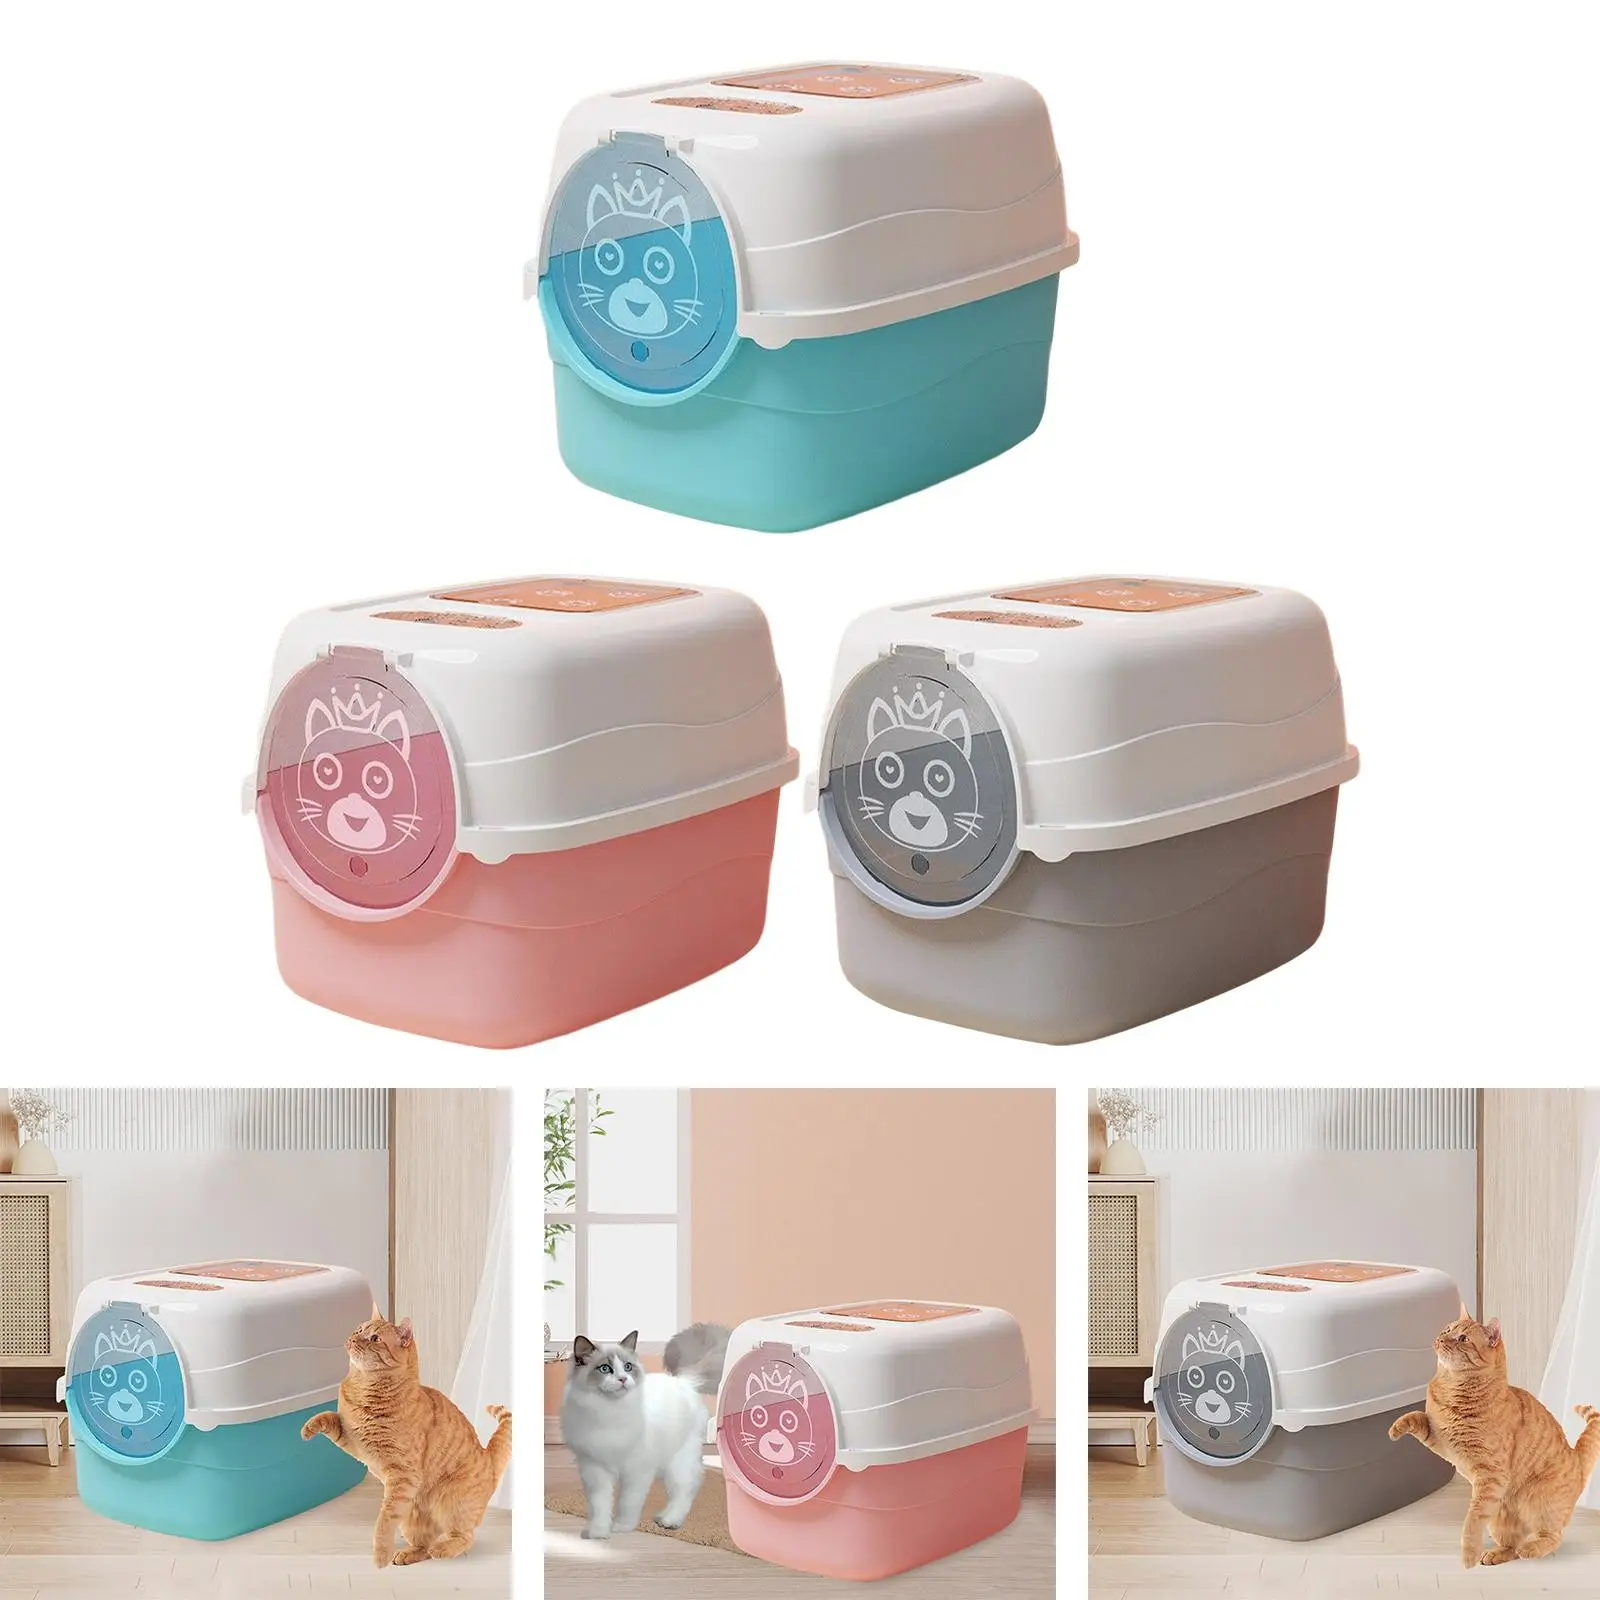 Hooded Cat Litter Box with Lid Enclosed Cat Toilet Large Cat Litter Tray Easy to Clean Anti Splashing Kitten Potty Accessories